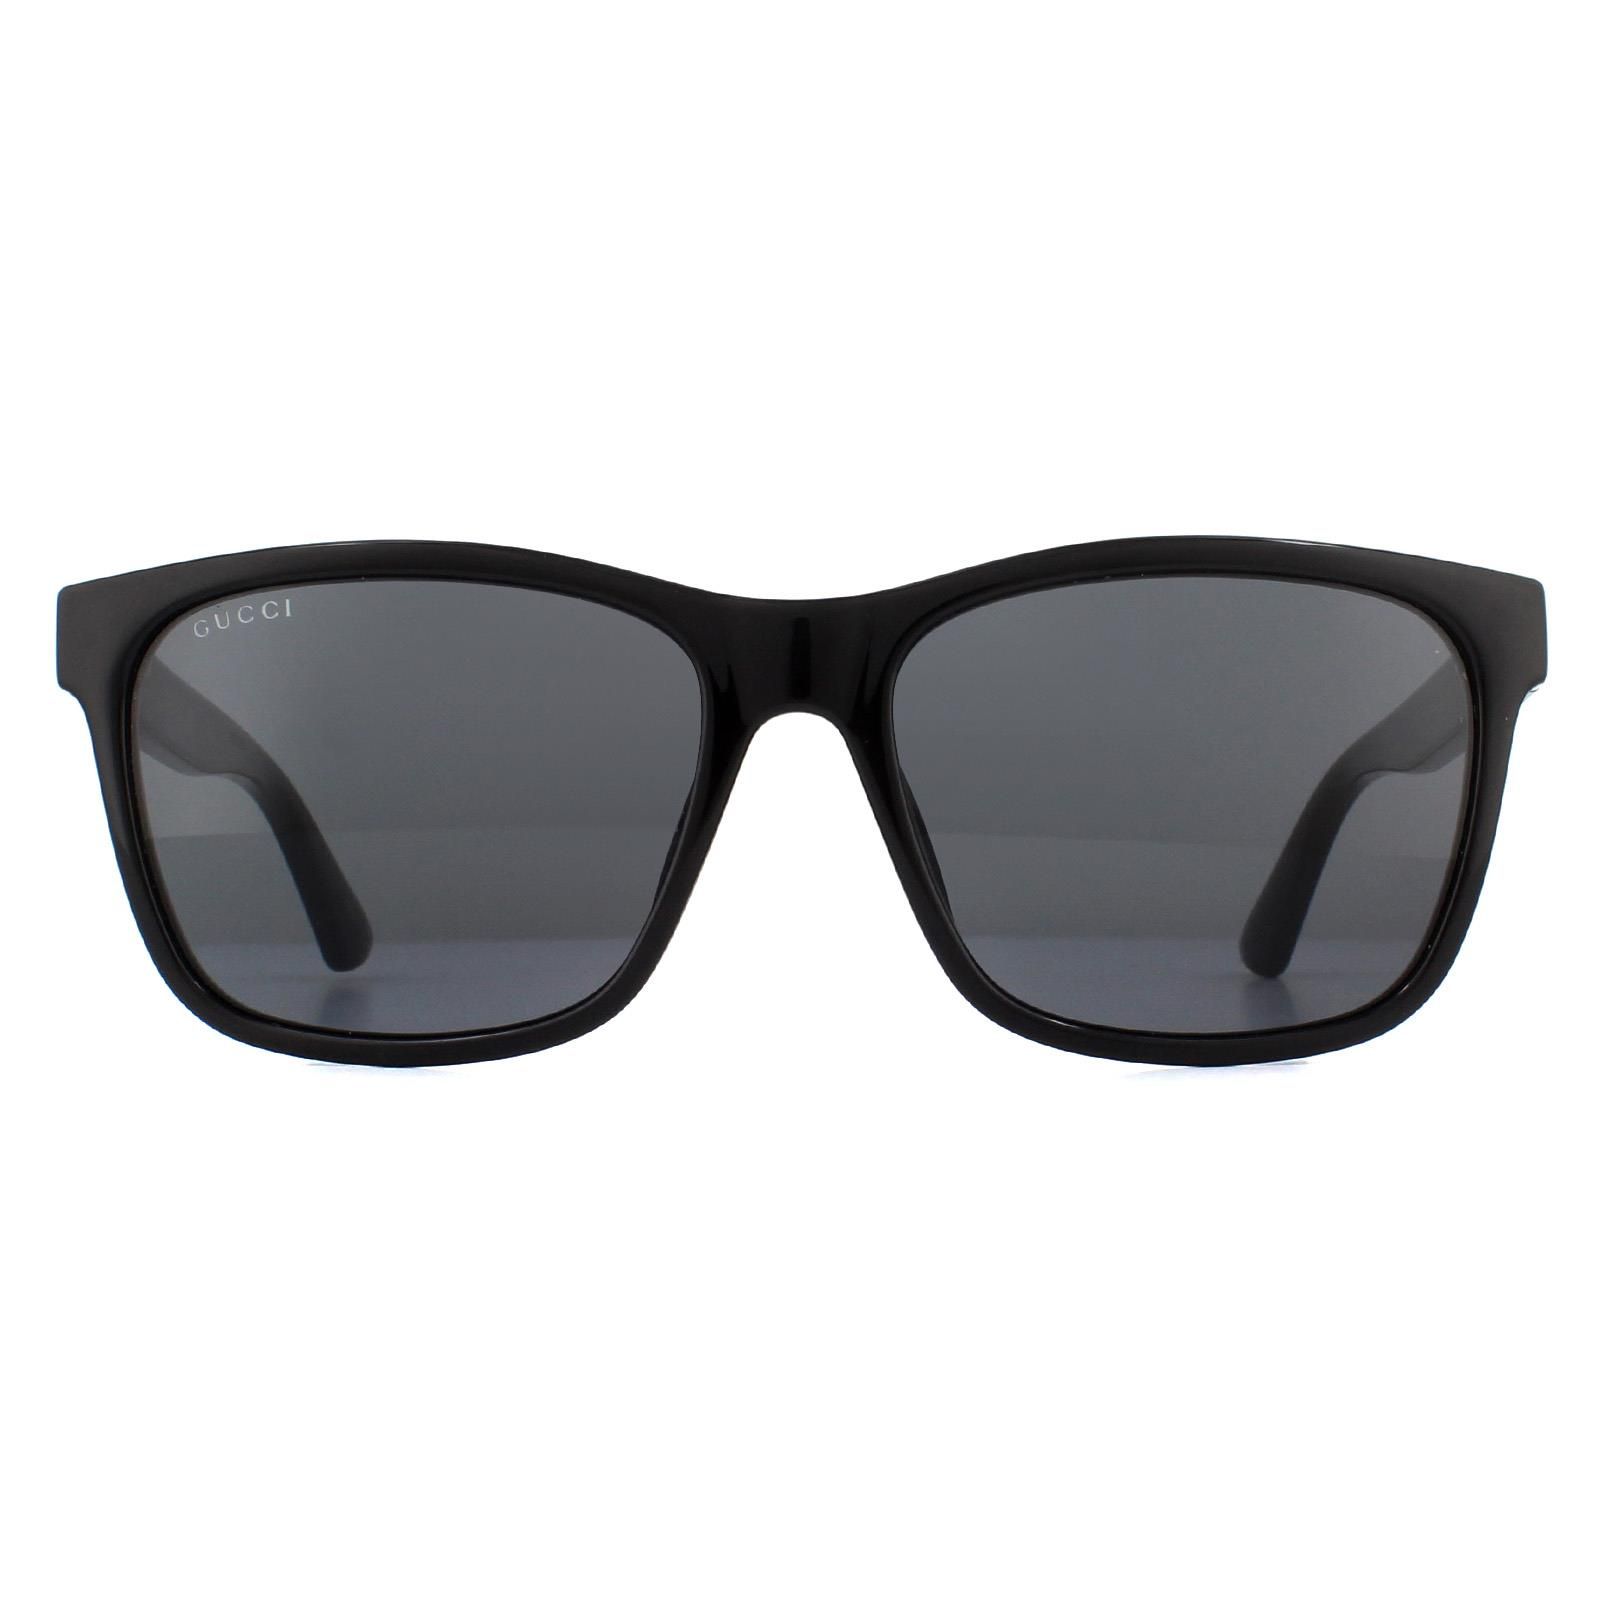 Gucci Sunglasses GG0746S 001 Black Grey  are a classic rectangular style made from chunky acetate with Gucci branding on the temples.